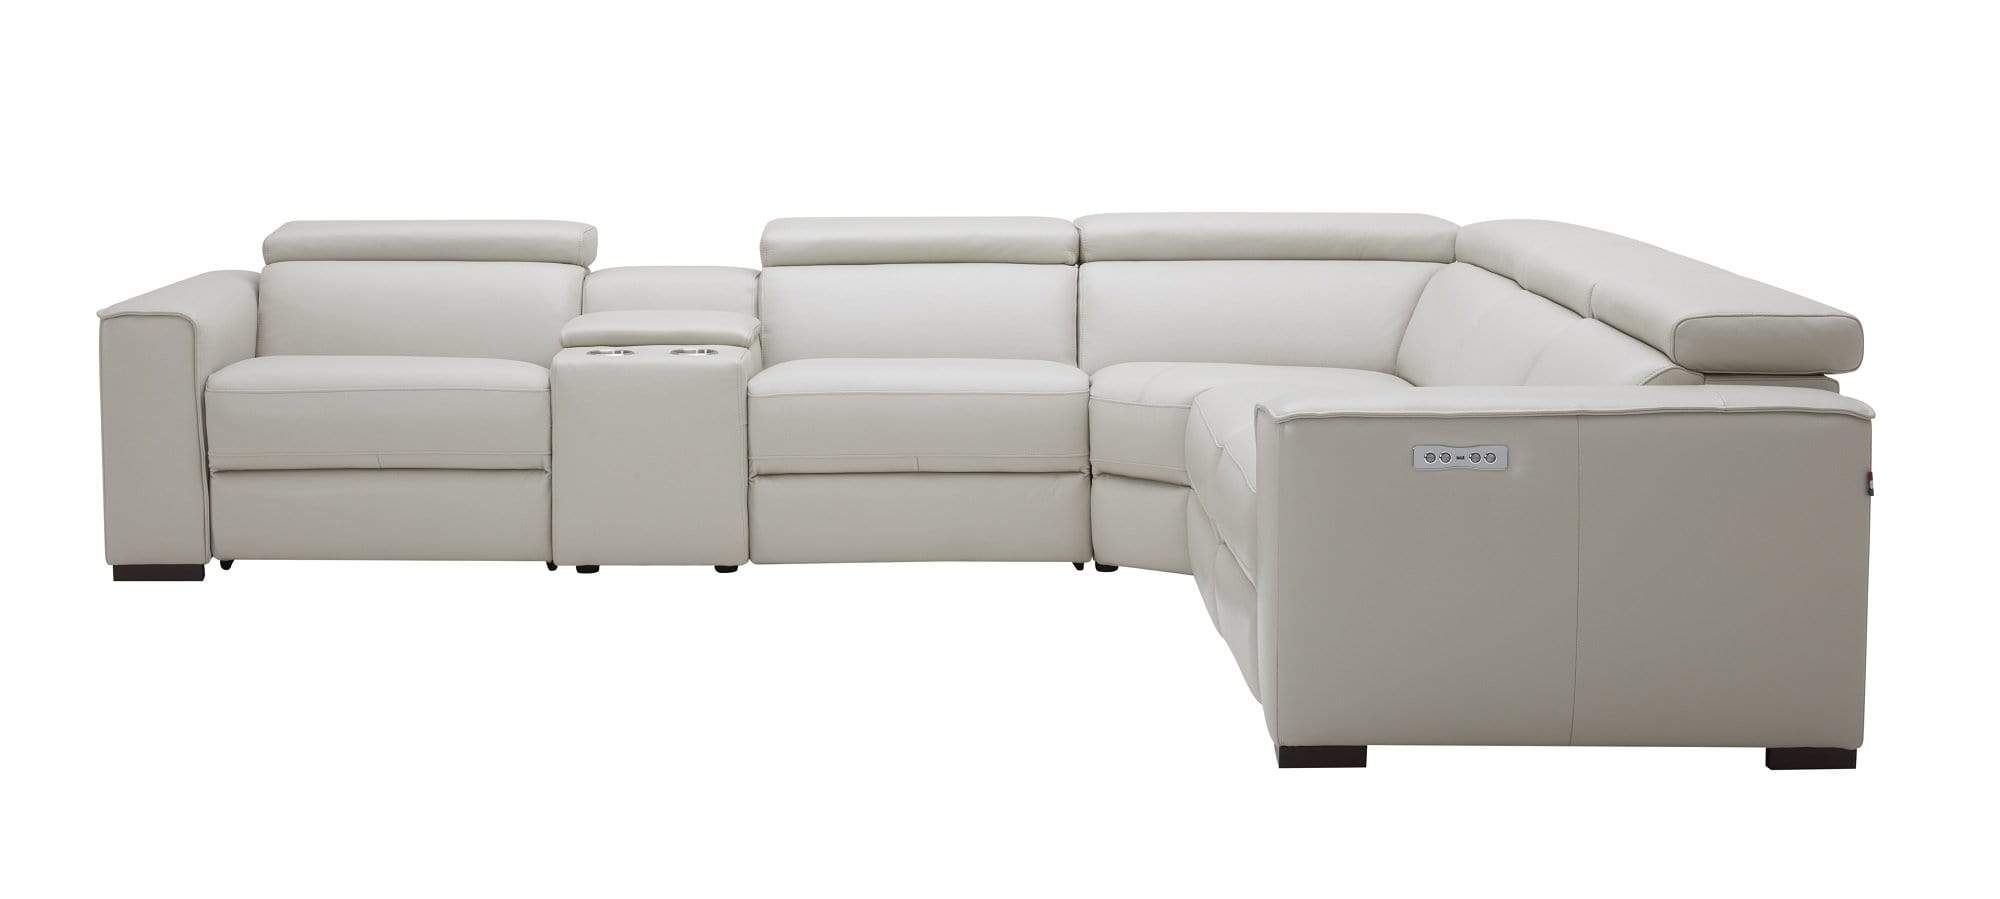 Picasso 6pc Motion Sectional In Silver Grey